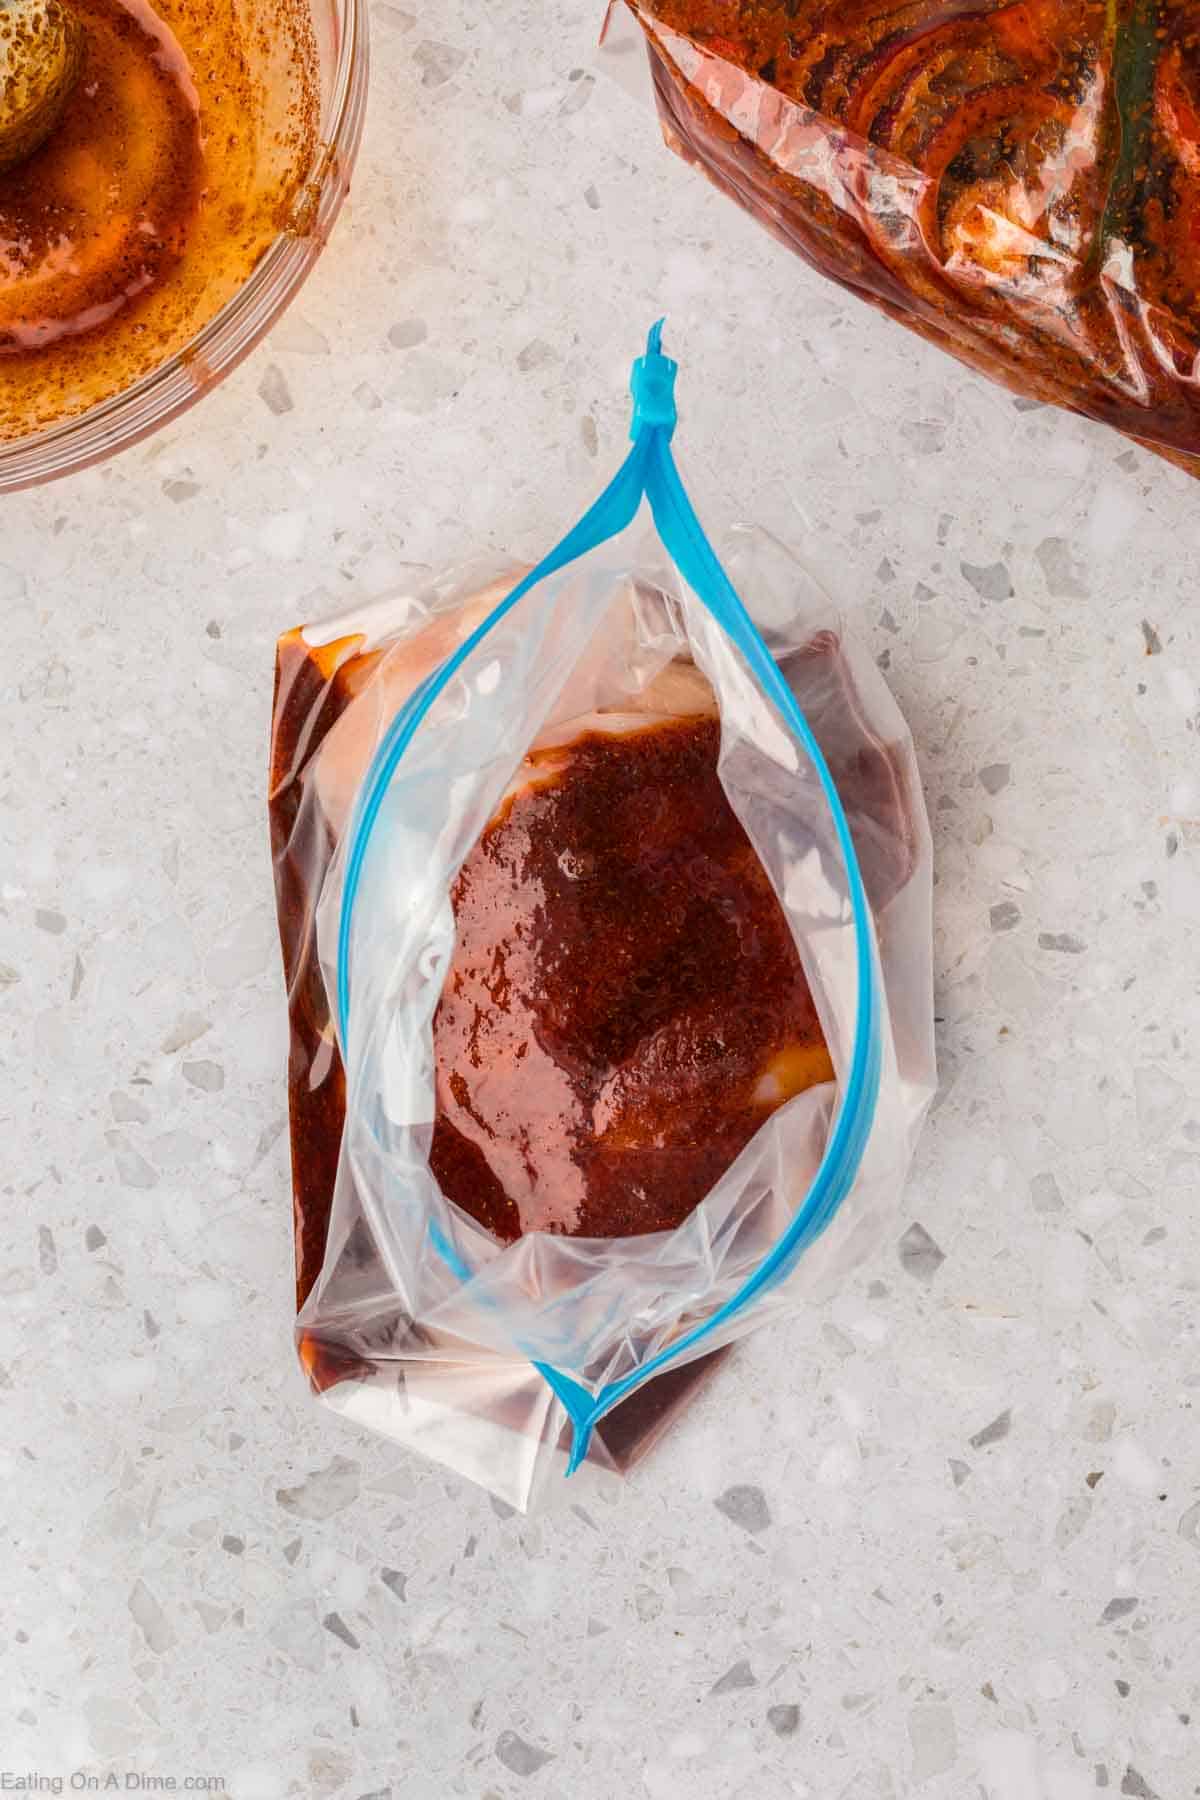 Pouring the marinade over the chicken in a ziplock bag